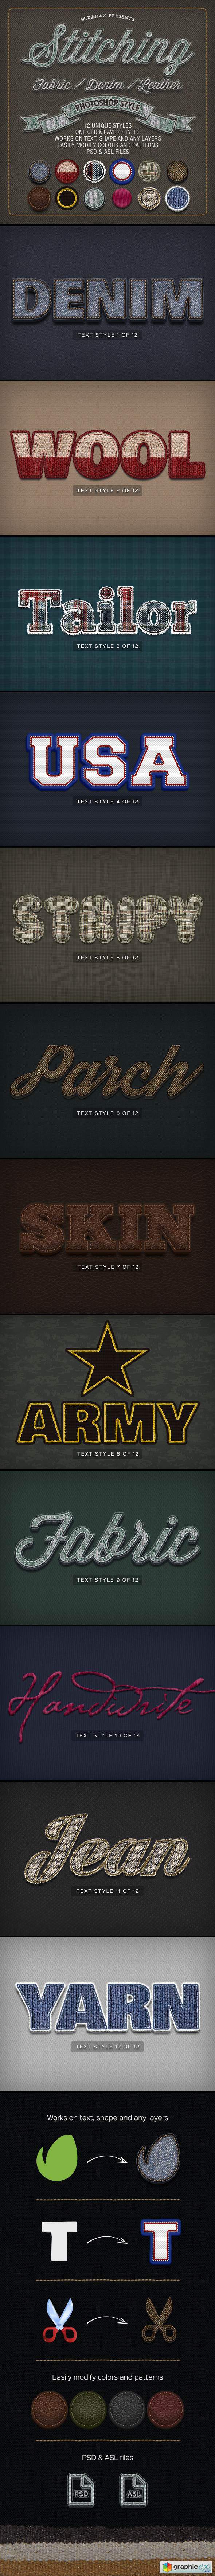 Stitching Fabric - Denim - Leather Text Effects